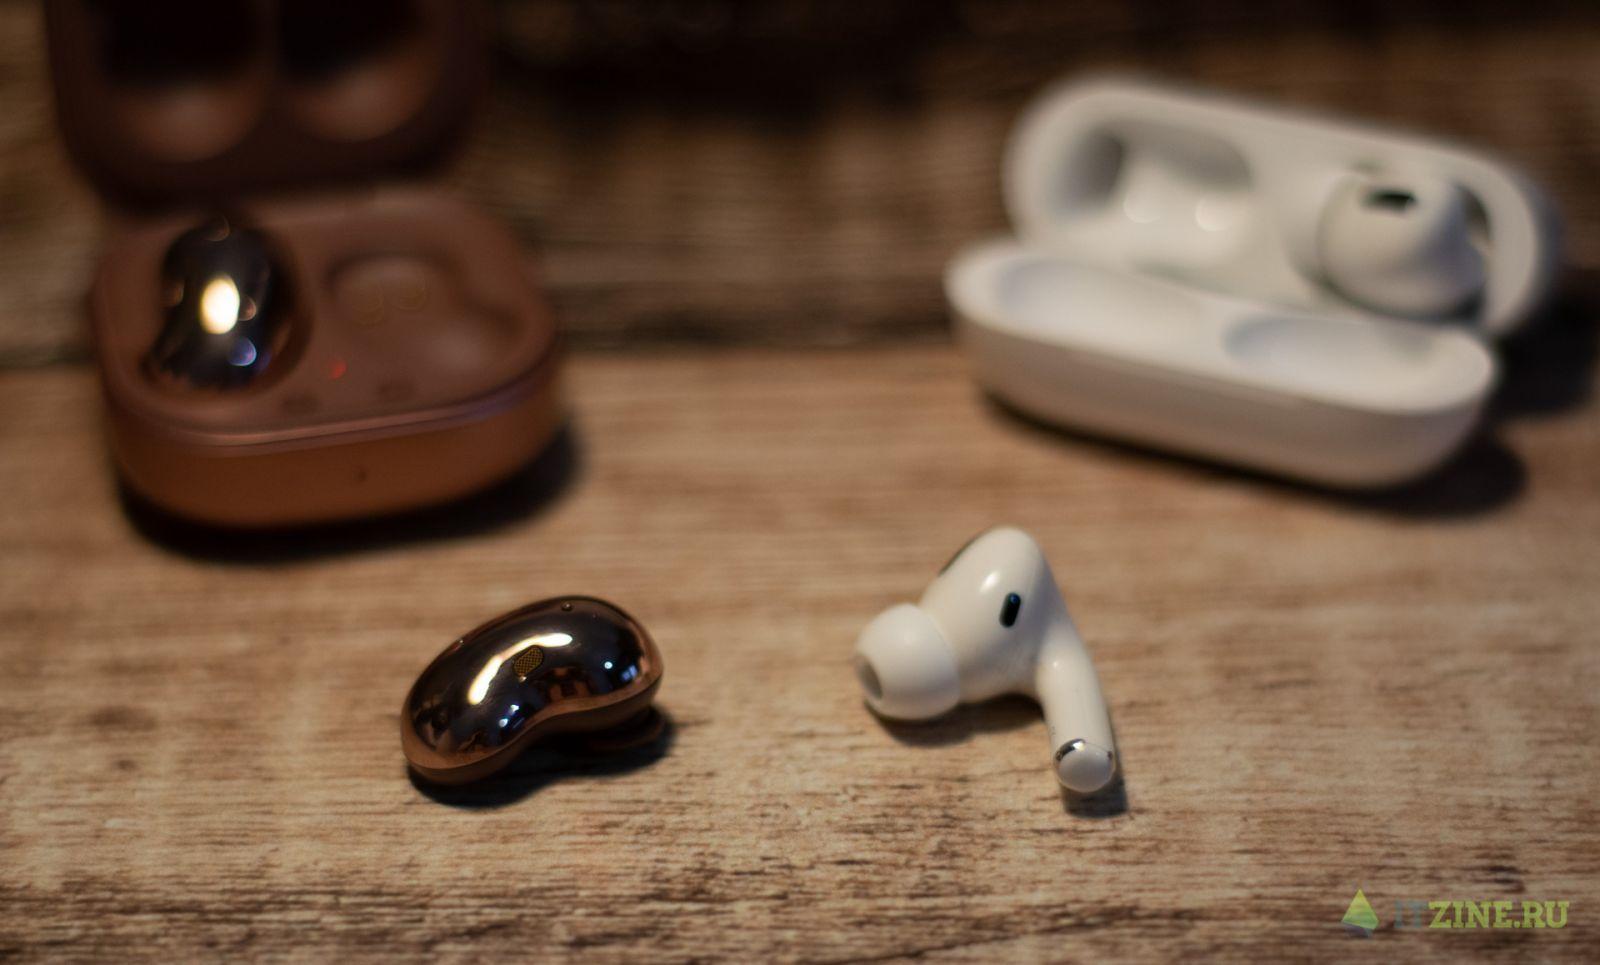 Earphone Samsung Galaxy Buds Live and Apple AirPods Pro Review of earphones Samsung Galaxy Buds Live: beans in the ears